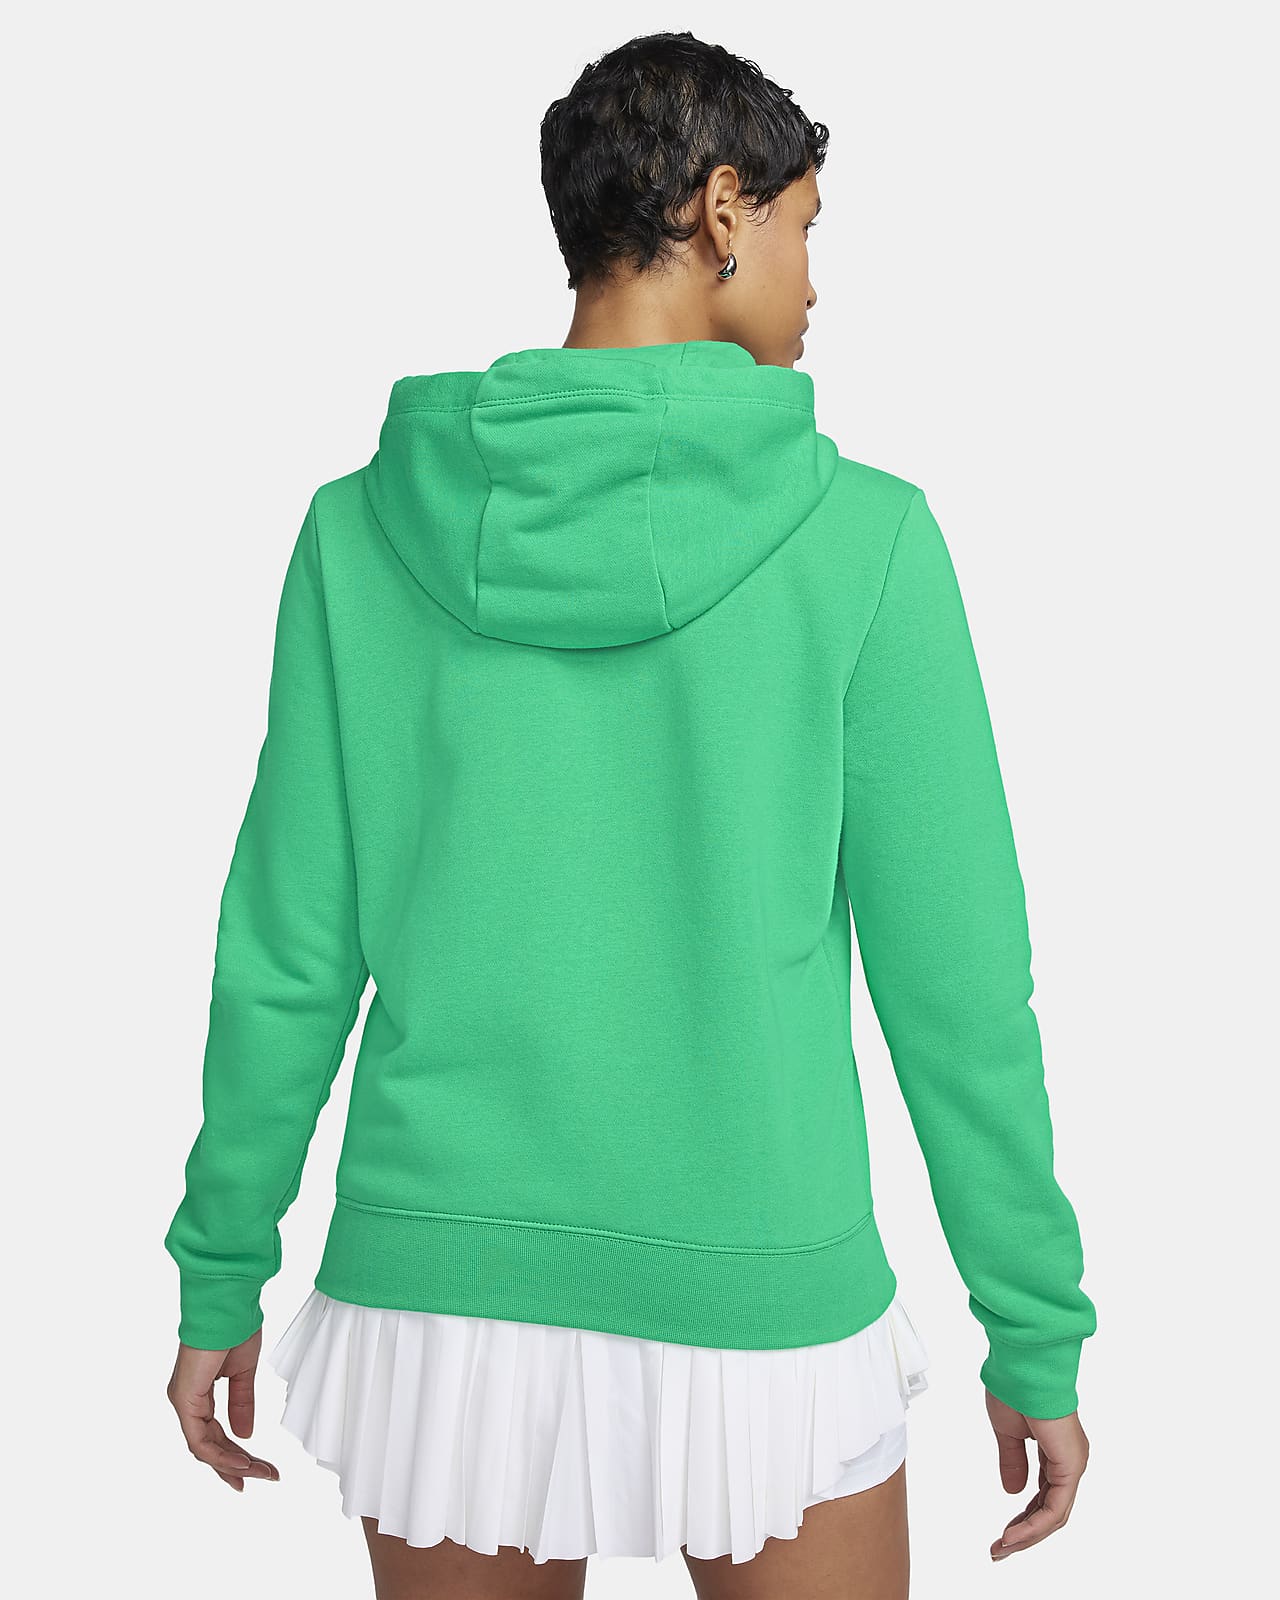 NIKE SPORTSWEAR WOMENS FULL ZIP HOODIE NEW WITH TAGS SIZE 3XL